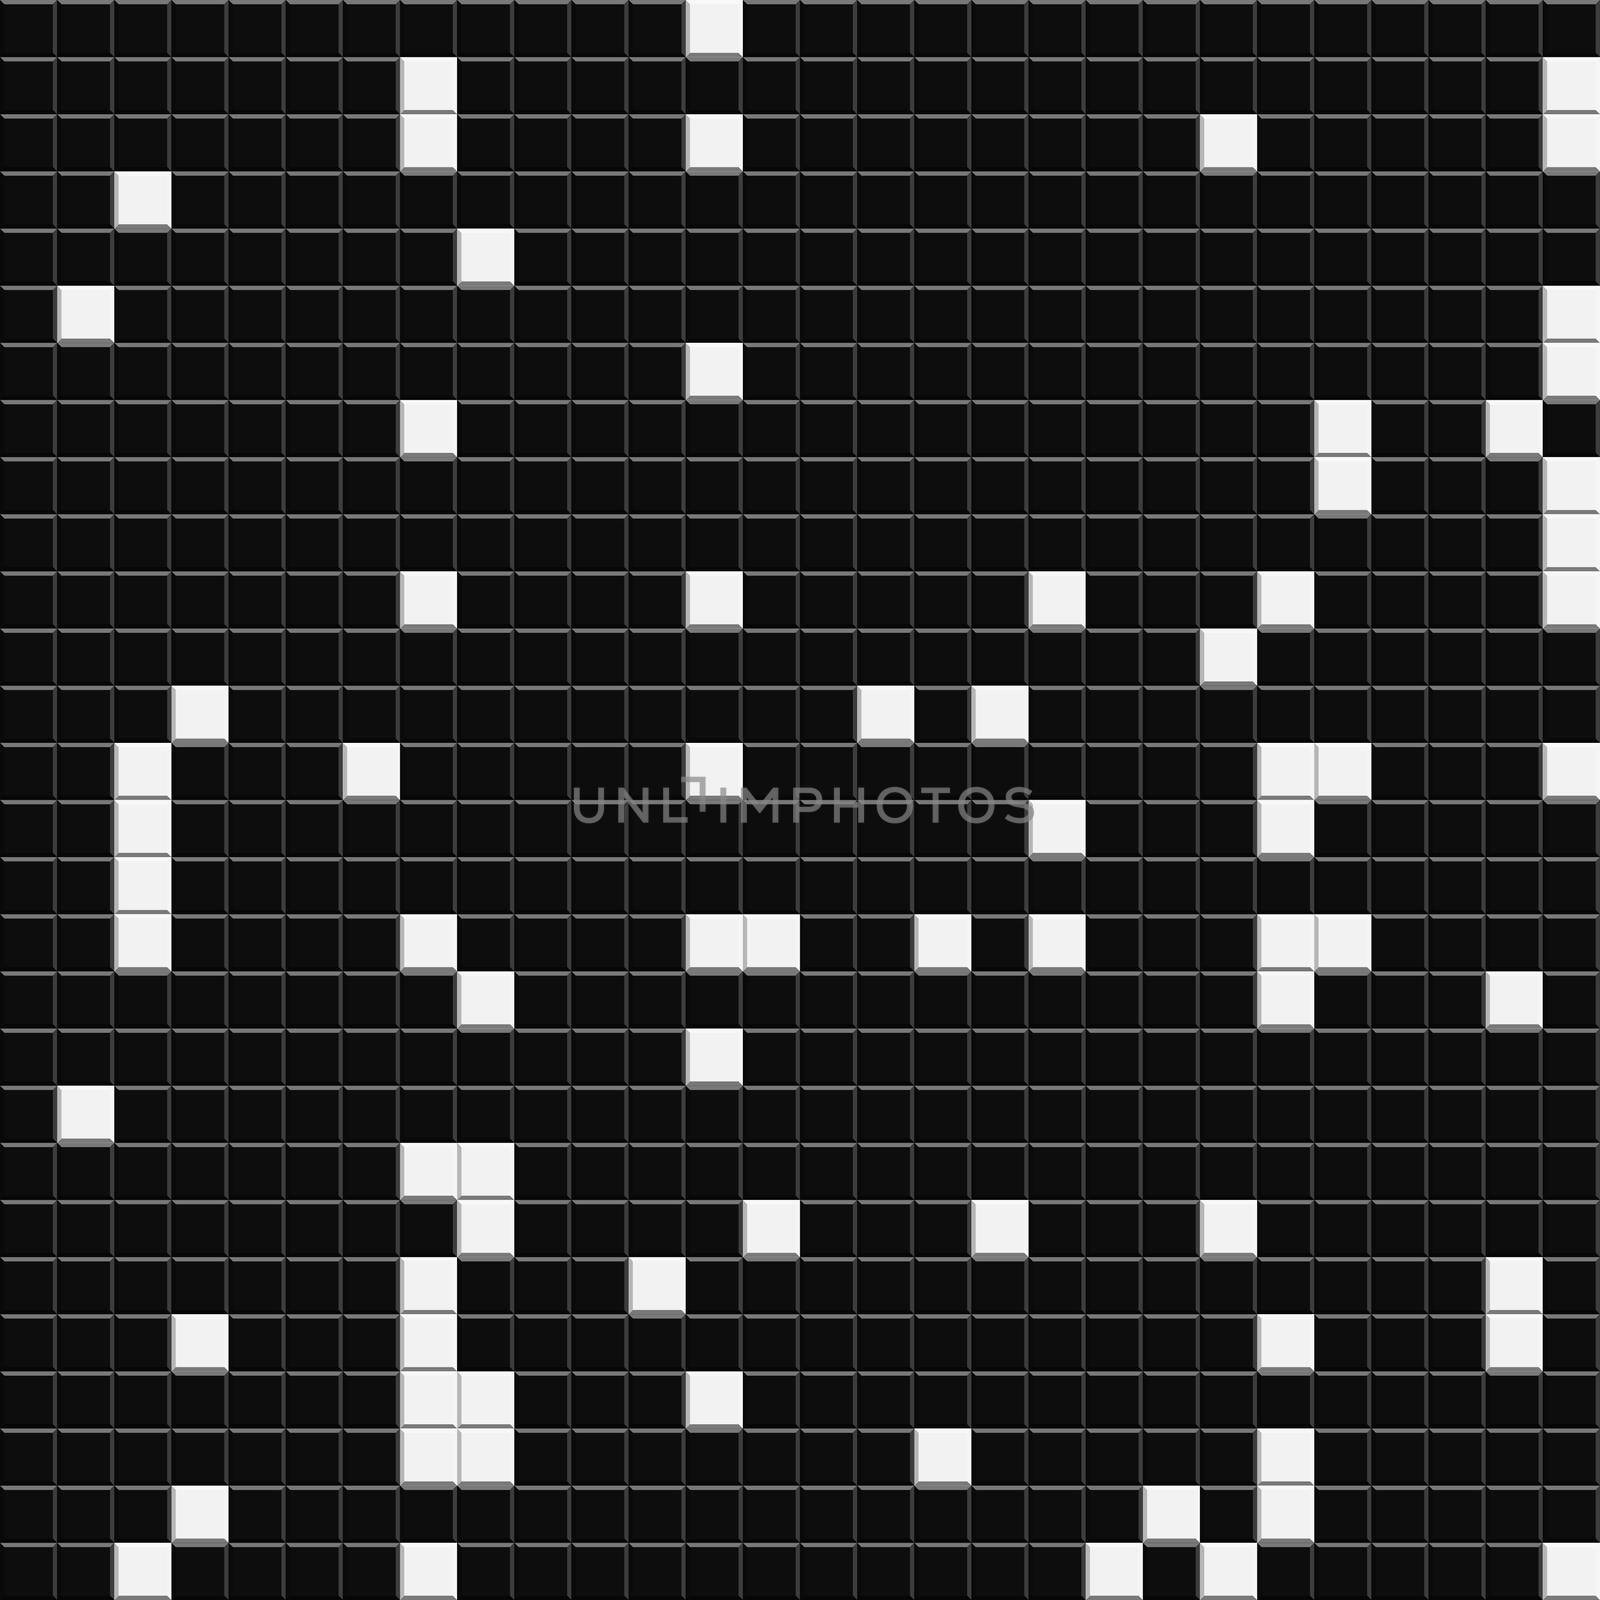 Black and white small cubical bricks pattern on solid sheet of wallpaper. Concept of home decor and interior designing